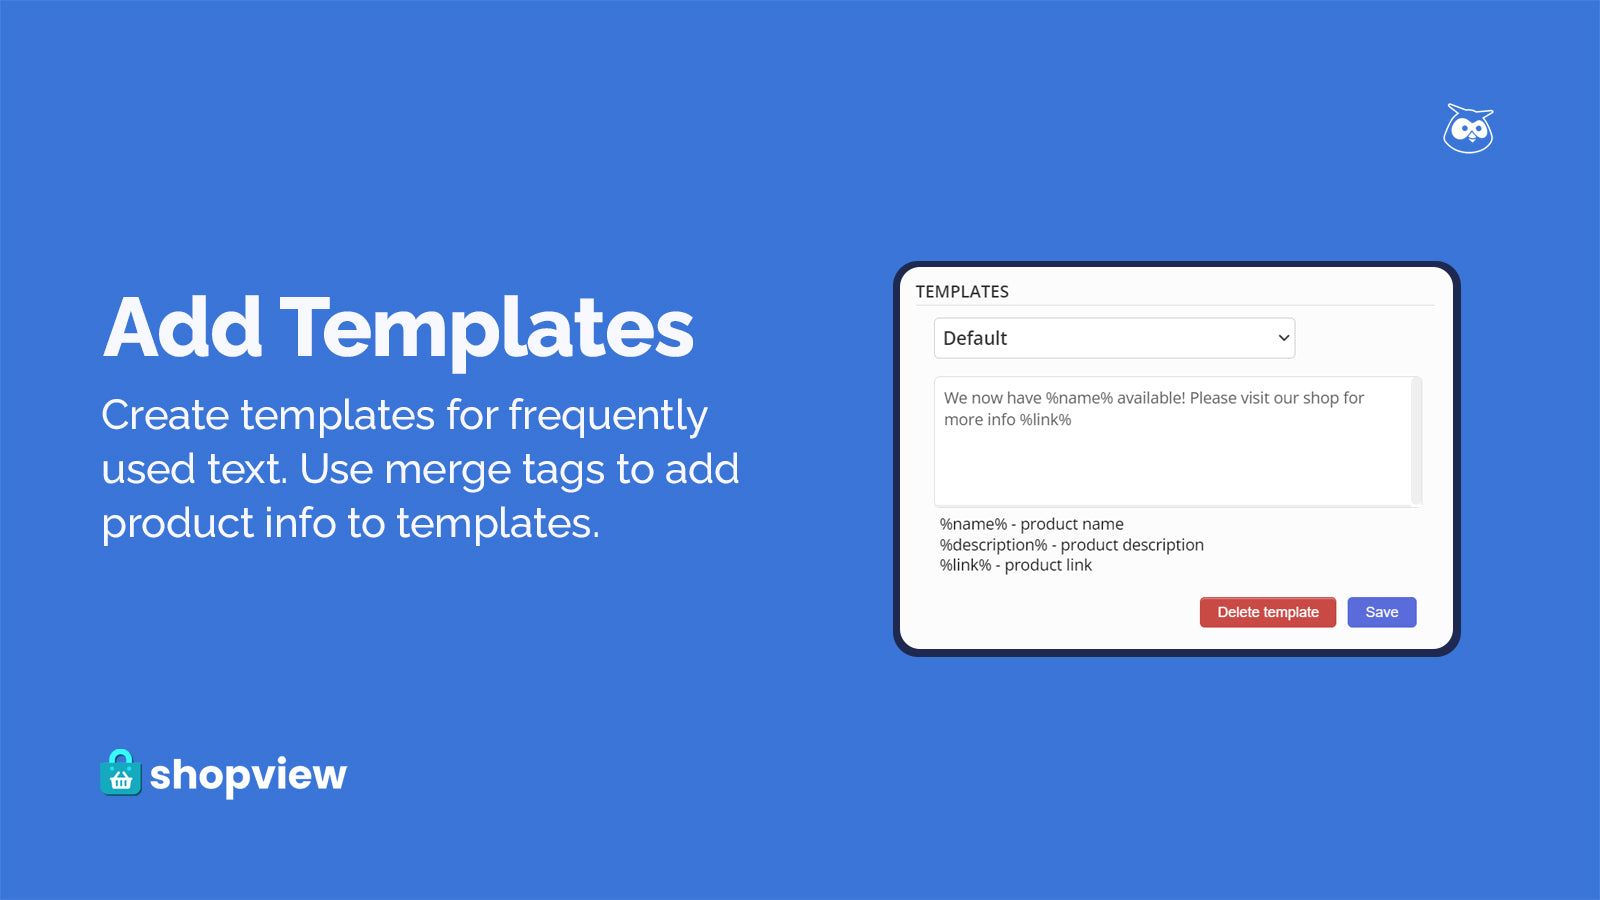 Create and save templates for frequently used posts/replies